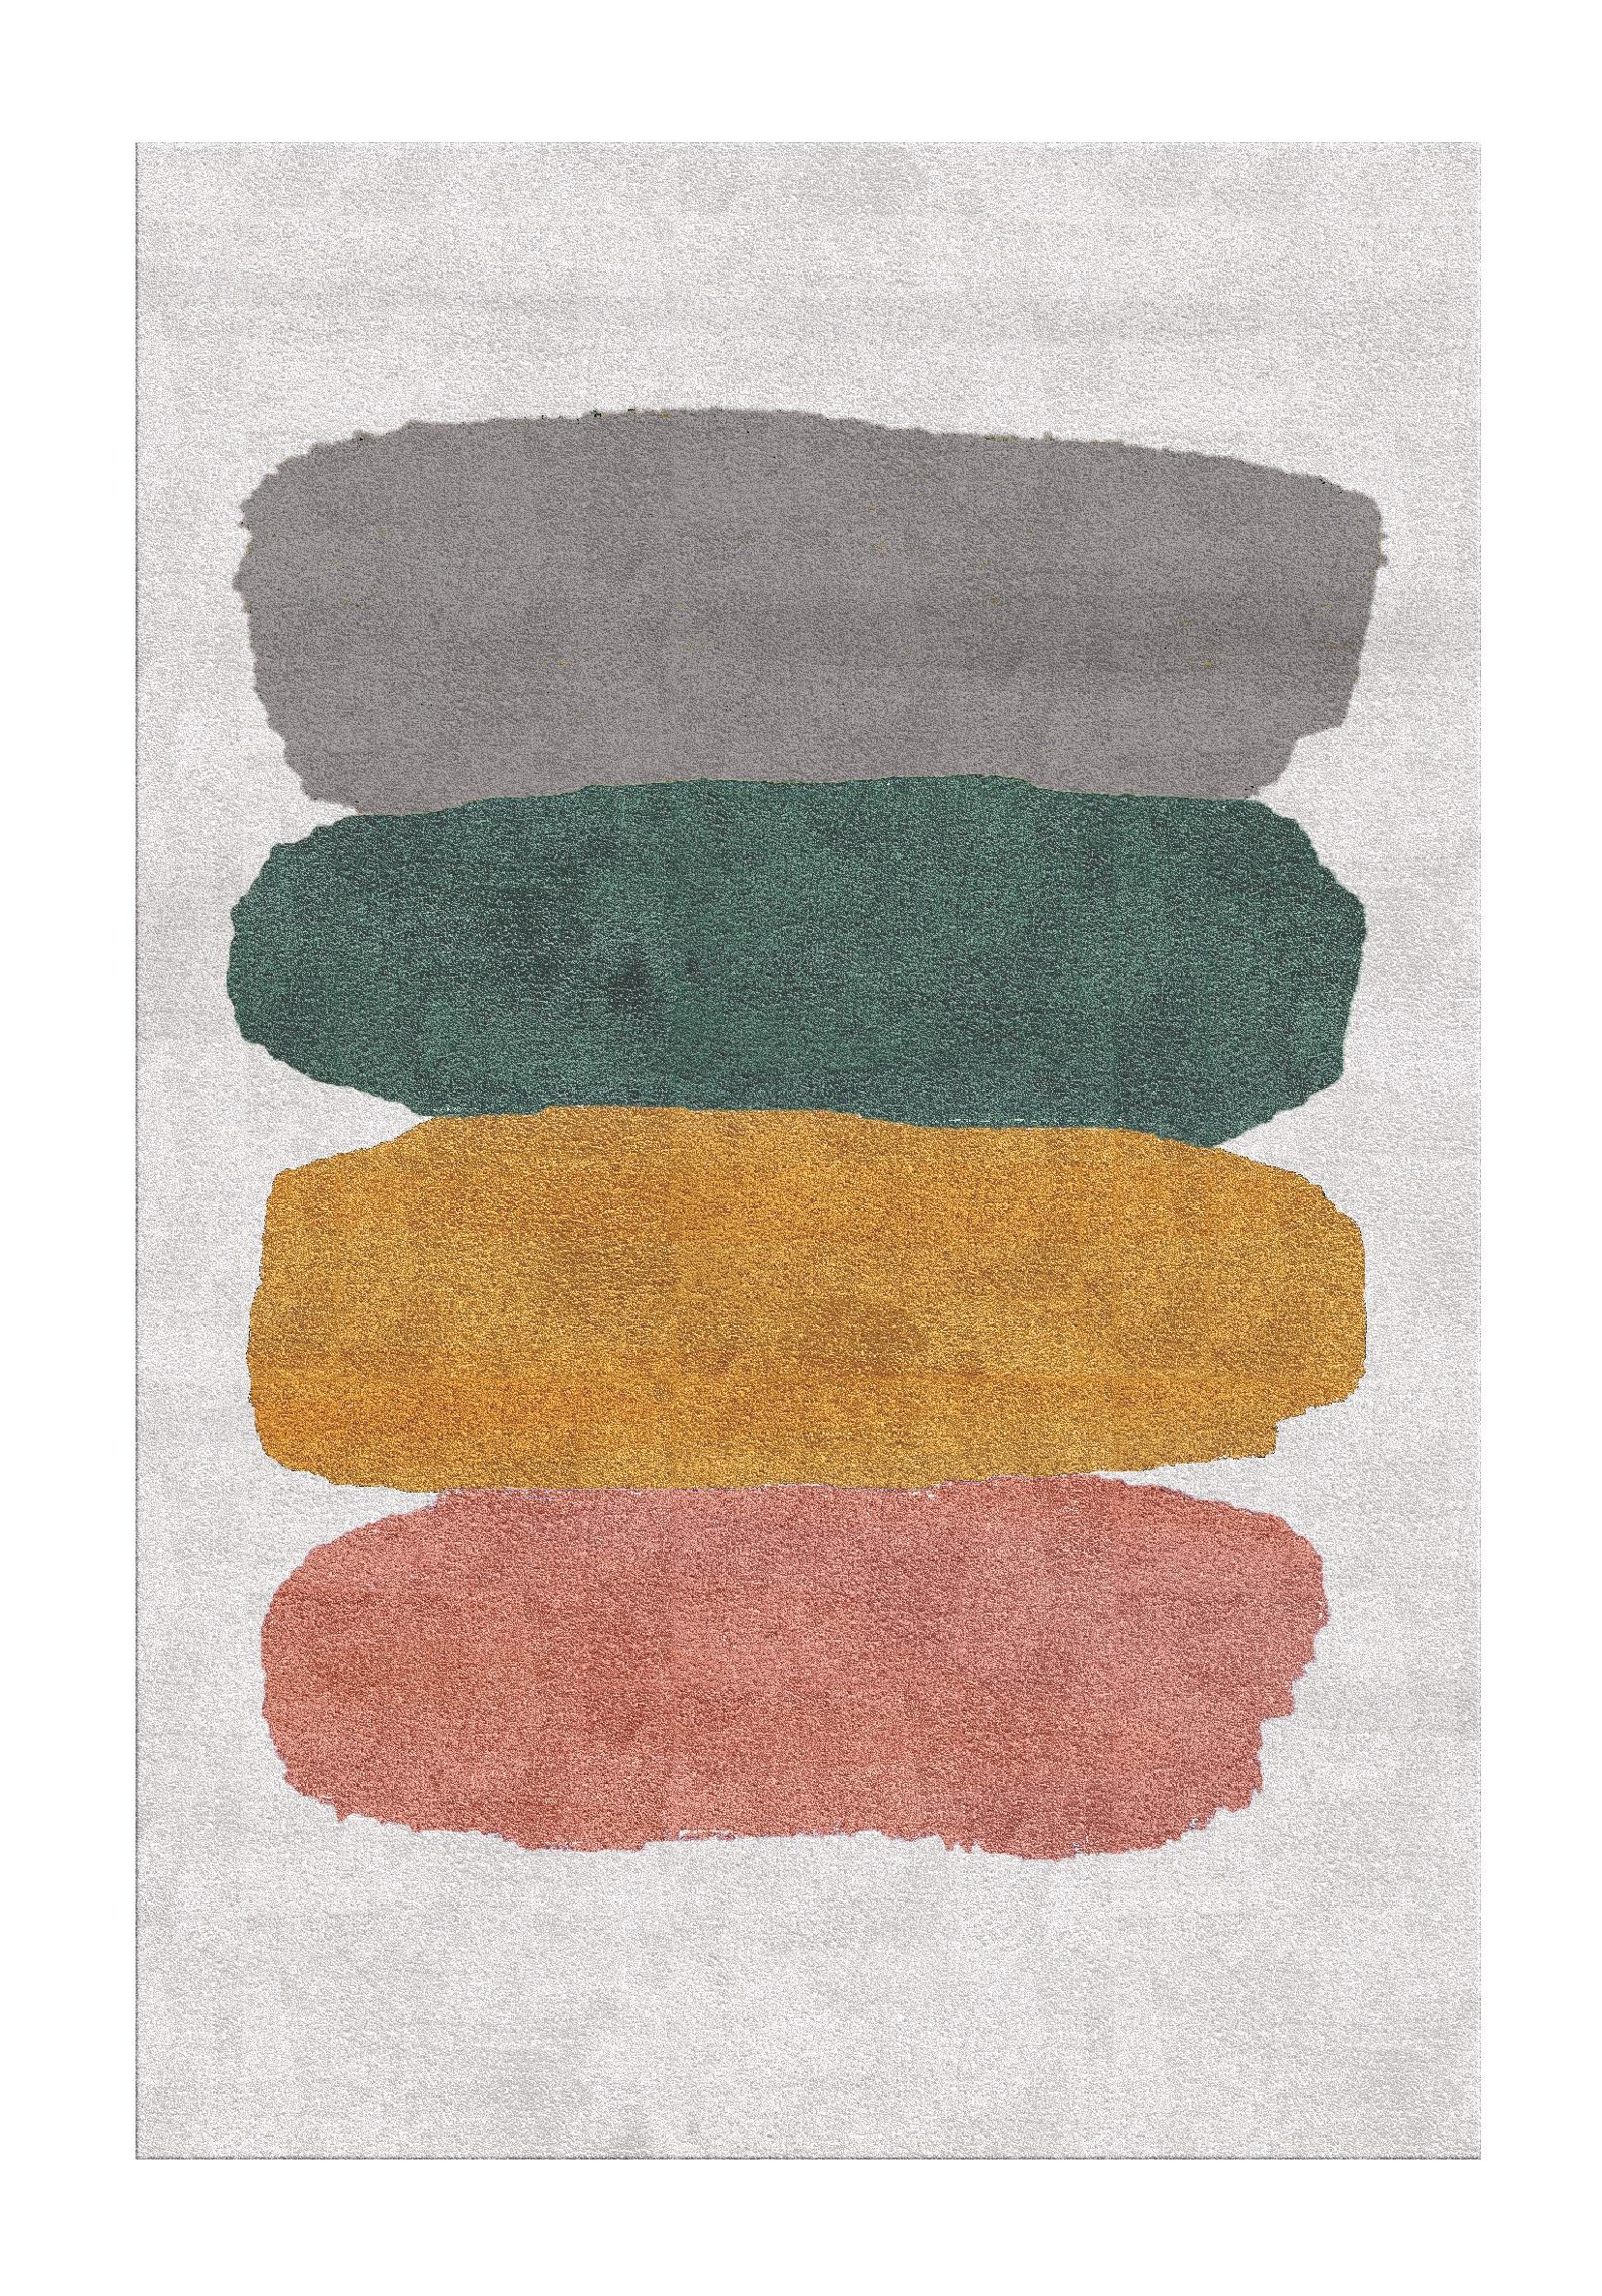 Palette rug IV by Sarah Balivo.
Dimensions: D 300 x W 200 cm
Materials: Viscose, linen
Available in other colors.

The Palette collection drives its inspiration from the interior design world.
Each rug becomes a canvas redefining the interior